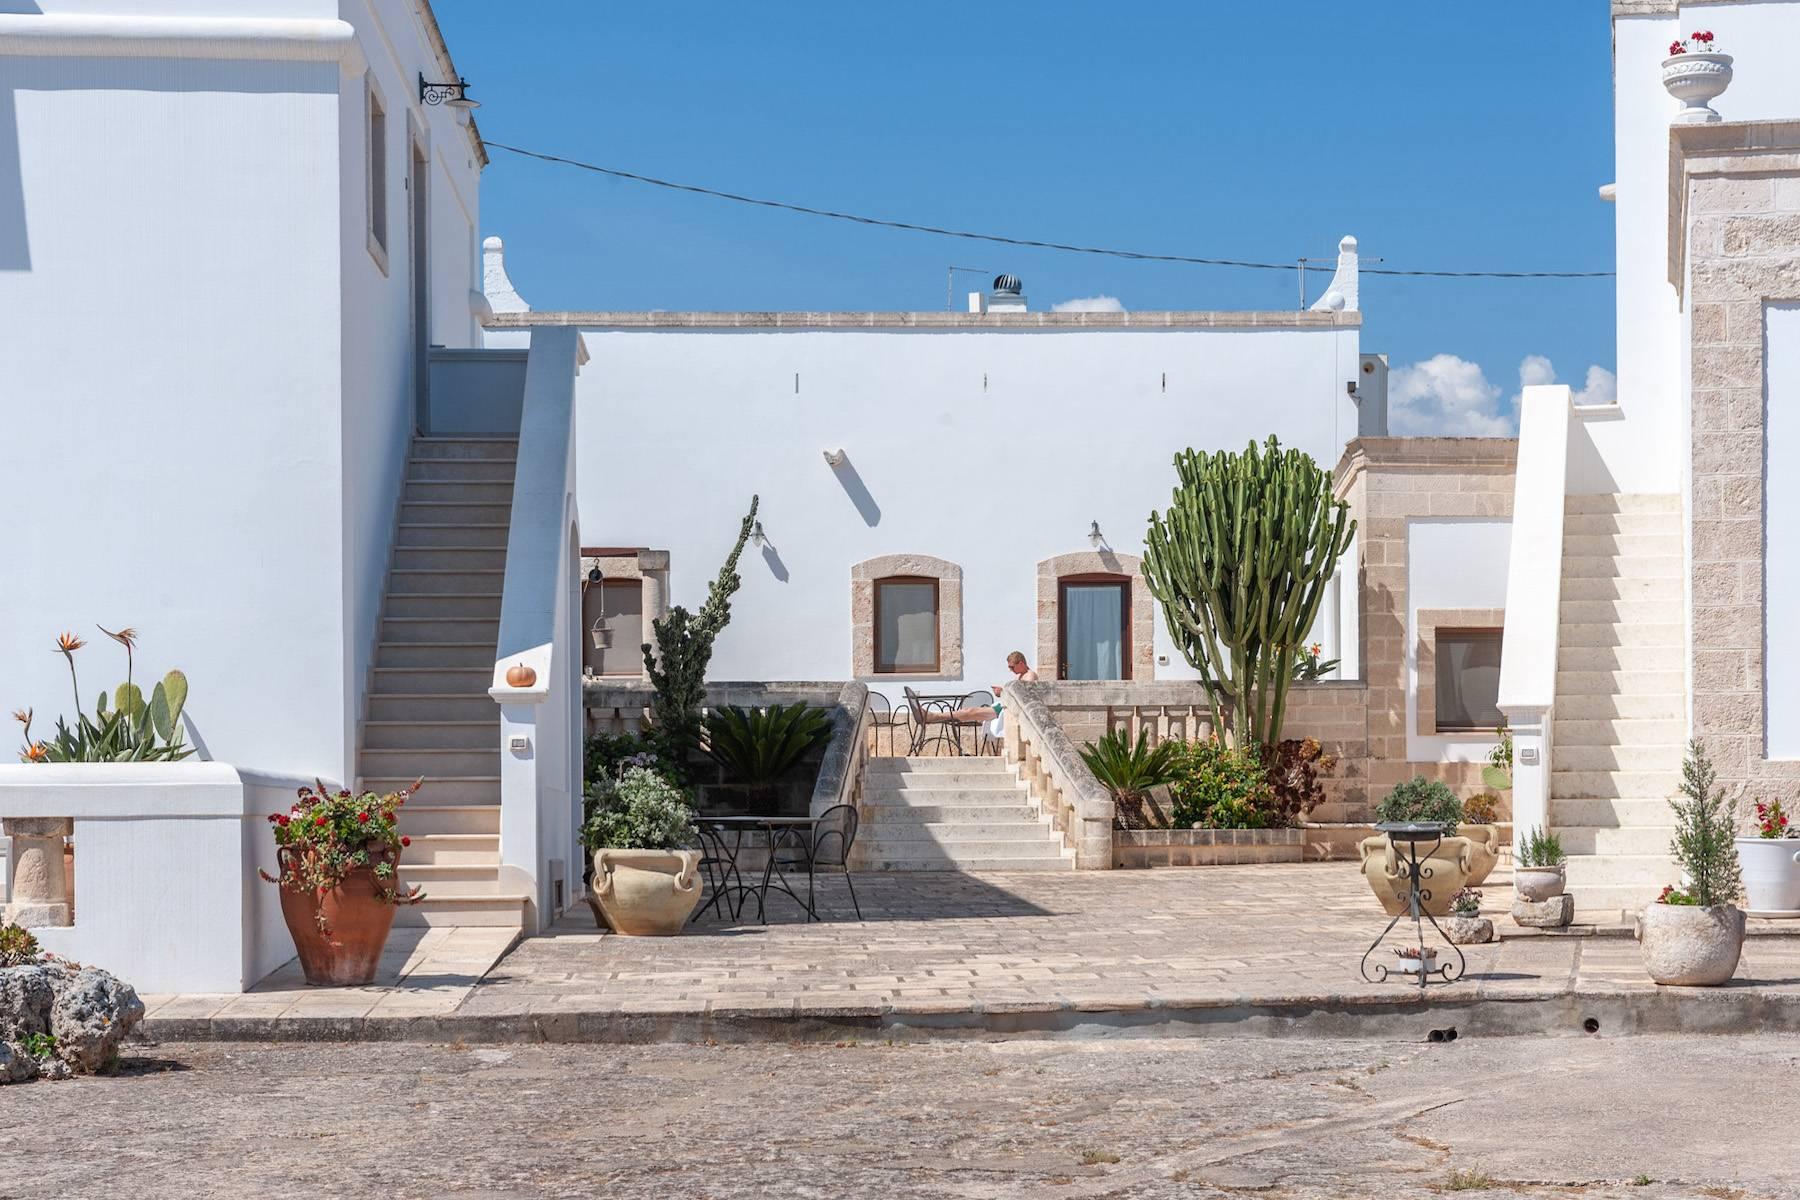 Charming 18th century Masseria surrounded by centuries-old olive trees - 4